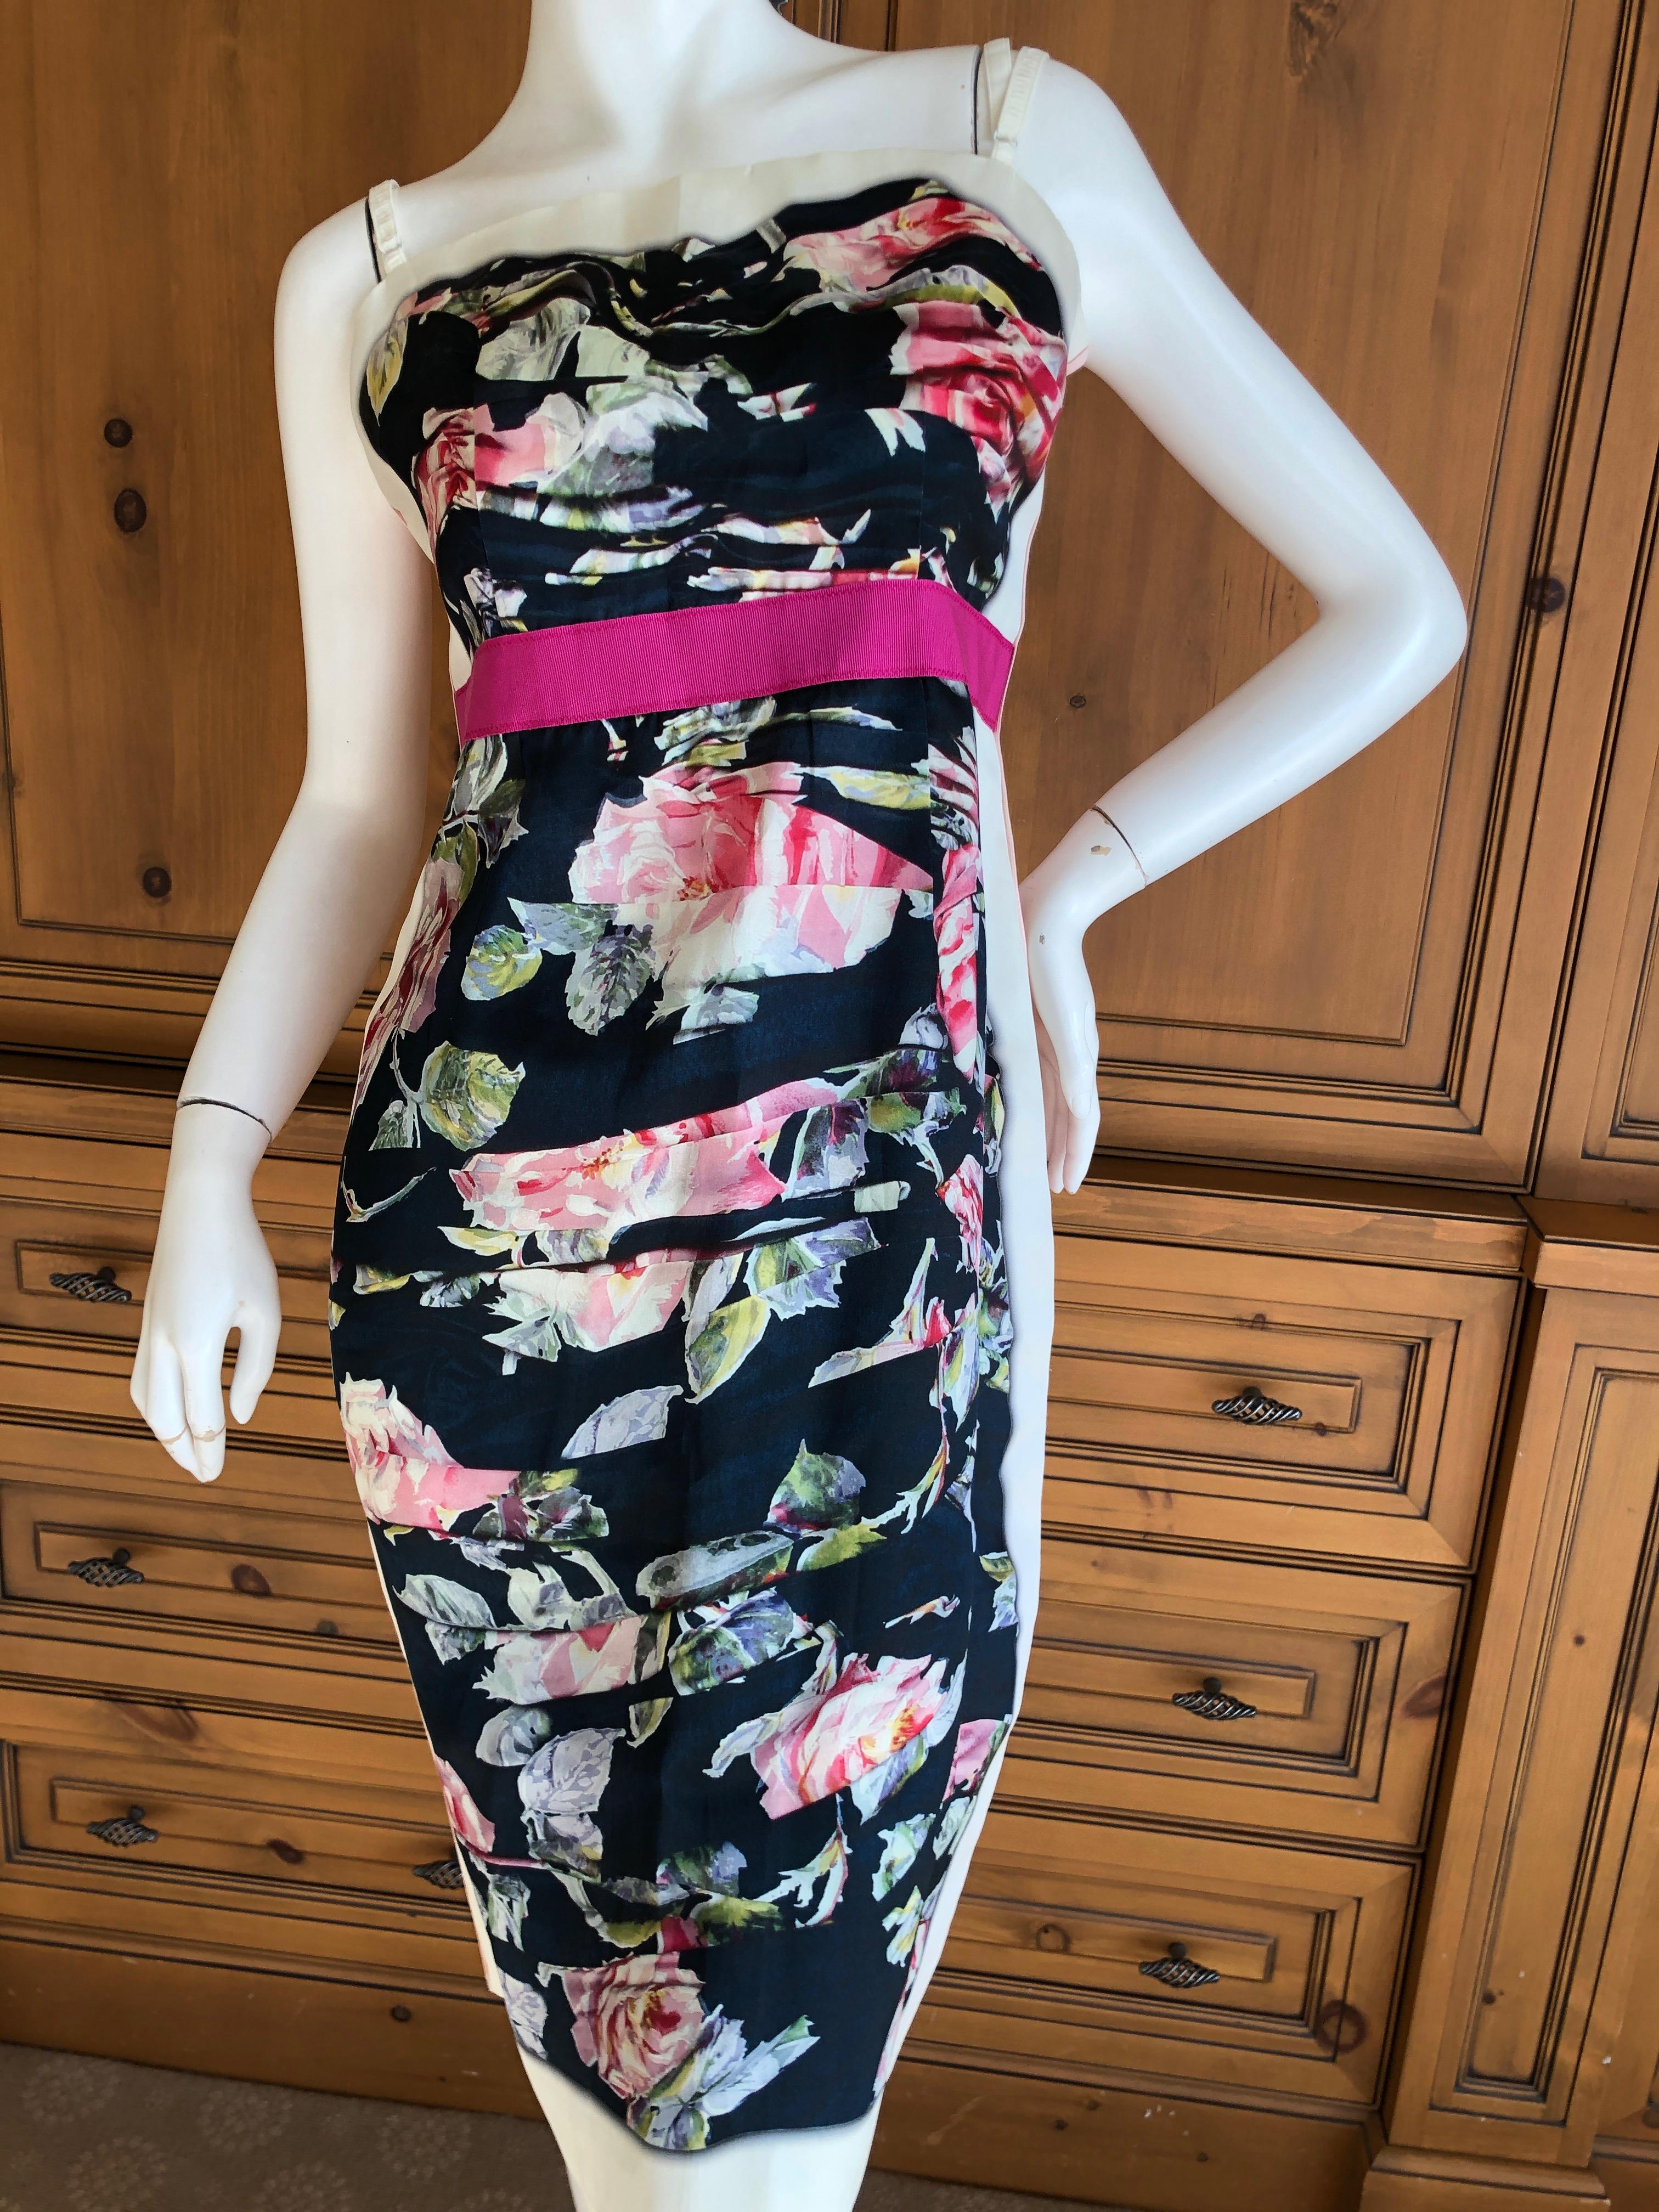 D&G Dolce & Gabbana Romantic Floral Dress
Size 44, but tag removed
Bust 36